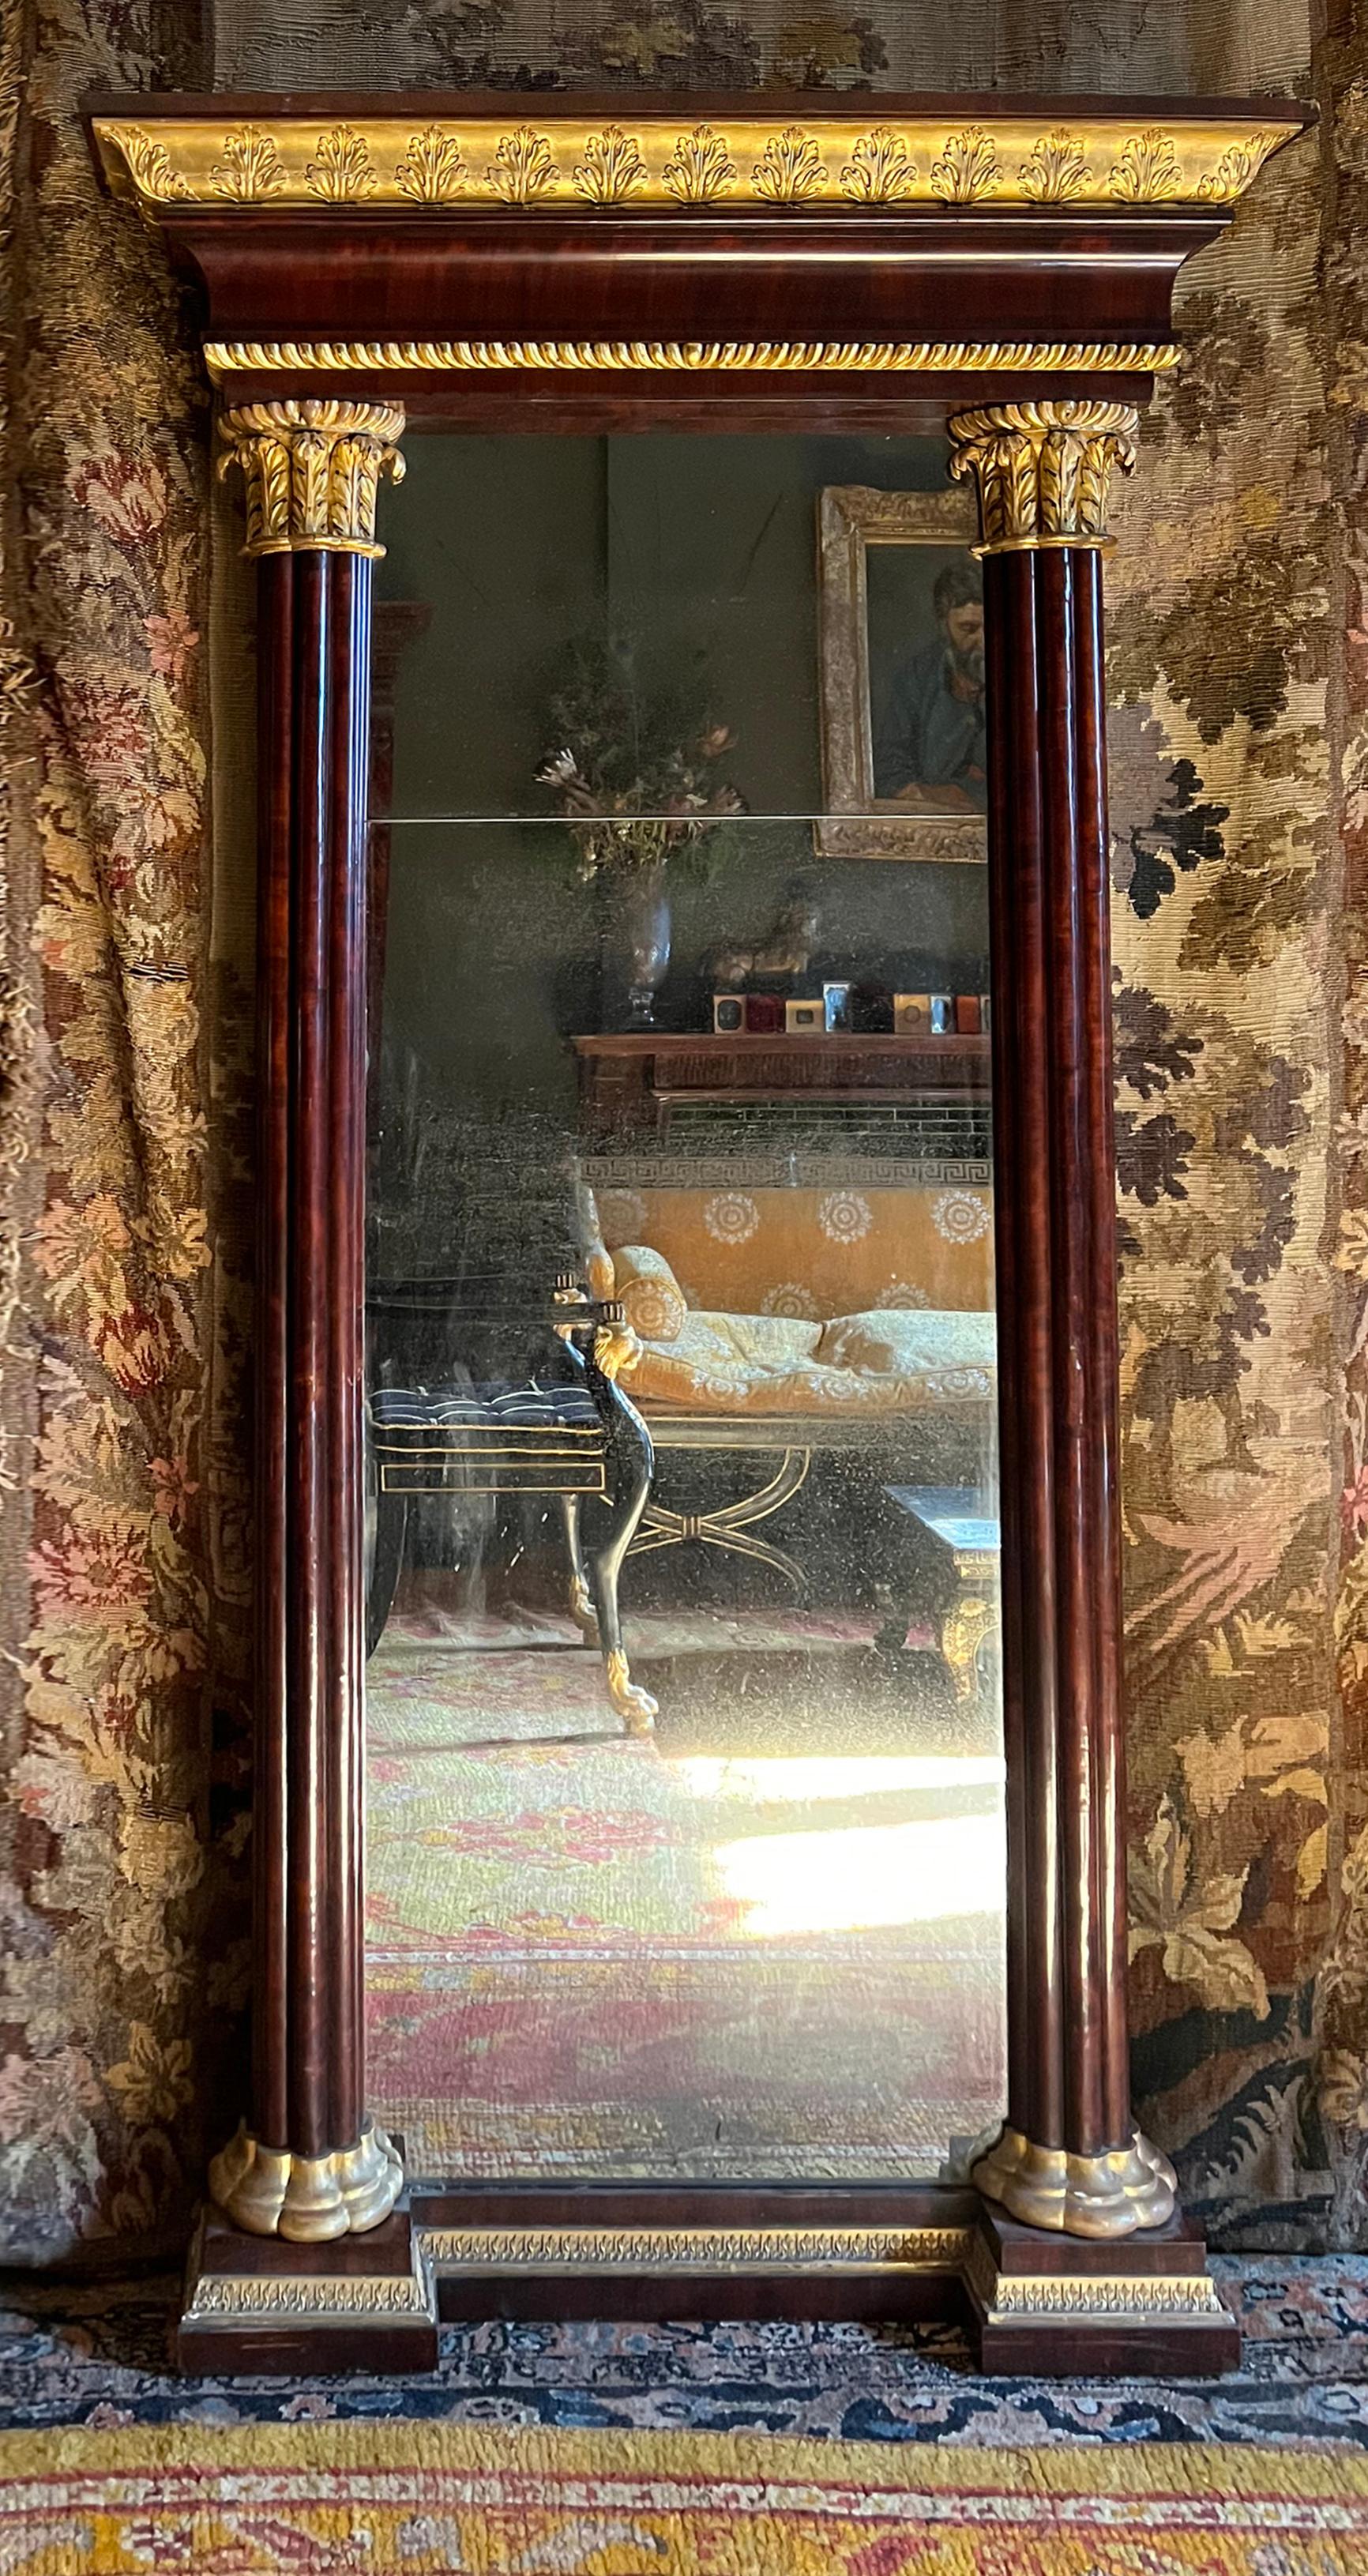 A magnificent architectural neoclassical pier mirror of fine detailing and original finishes. A broad entablature with a dramatic gilded cavetto moulding covered in low relief acanthus leaves rises above a a cove mahogany veneered moulding below